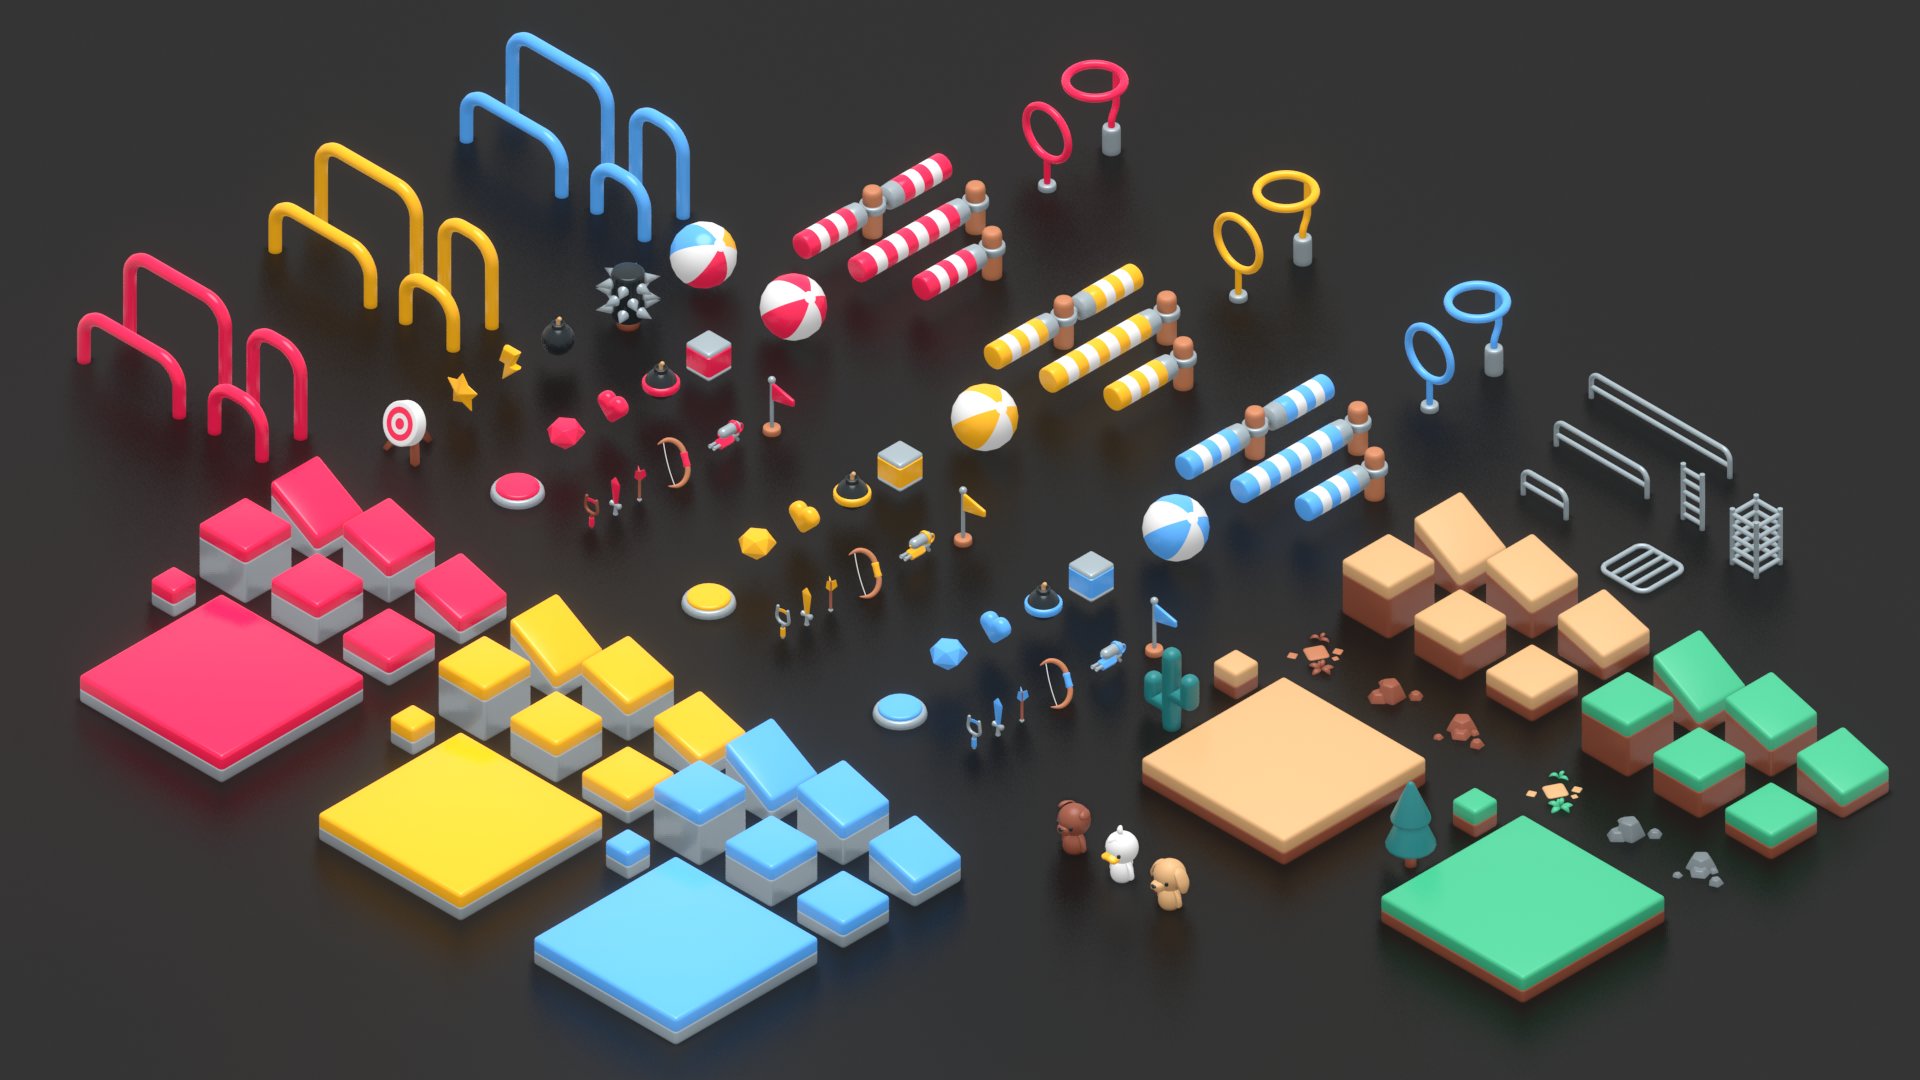 Adorable Stylized Assets Available for Free